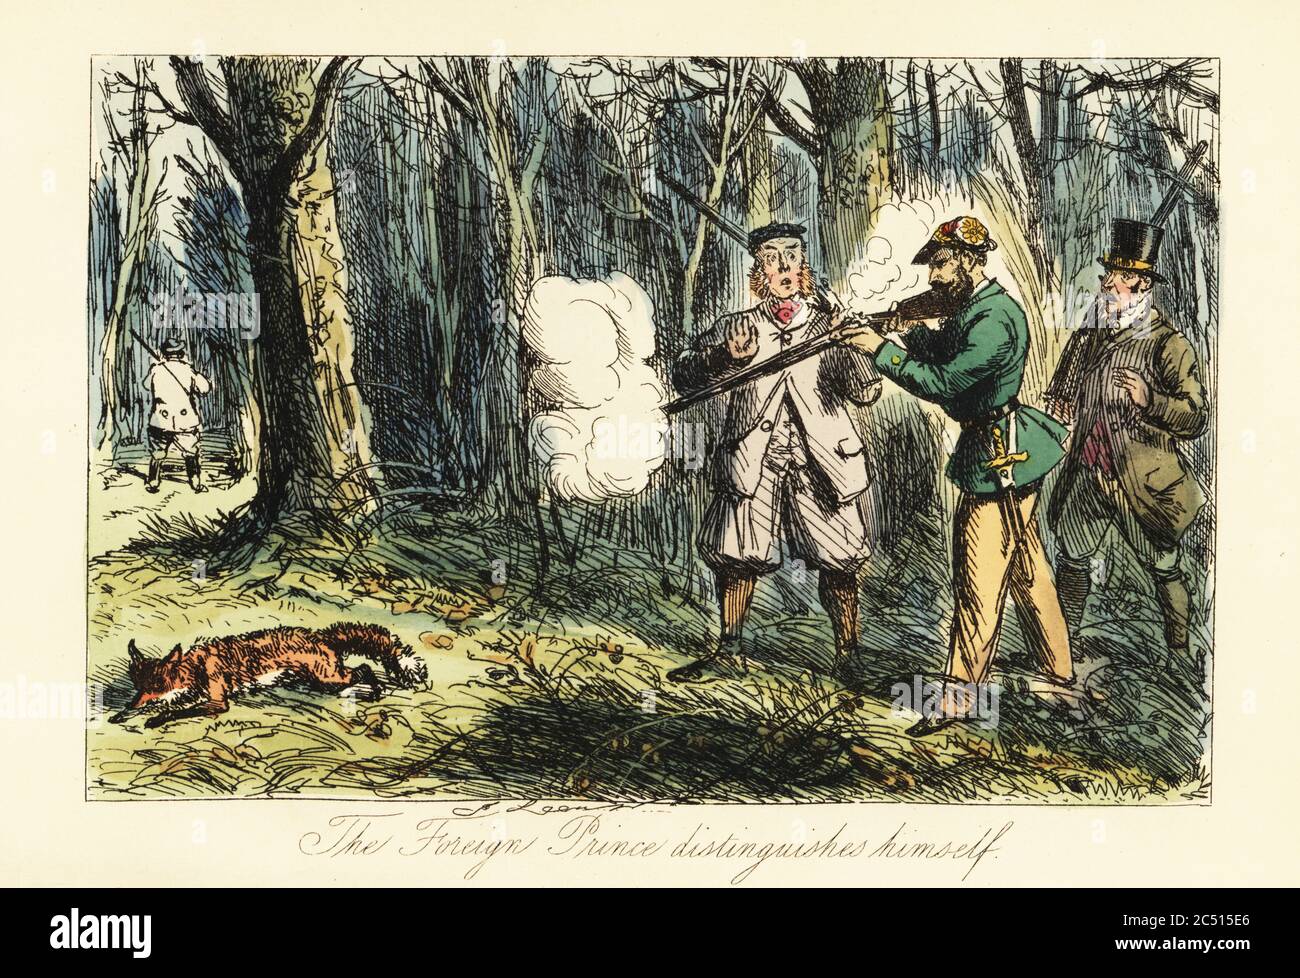 German aristocrat killing a fox in error at a shooting party, 19th century. The Duke of Tergiversation aiming his rifle at a fox rather than game in front of English beaters. The foreign prince distinguishes himself. Handcoloured steel engraving after an illustration by John Leech from Robert Smith Surtees’ Plain or Ringlets?, Bradbury and Evans London, 1860. Leech (1817-1864) was an English caricaturist and illustrator best known for his work for Punch magazine. Stock Photo